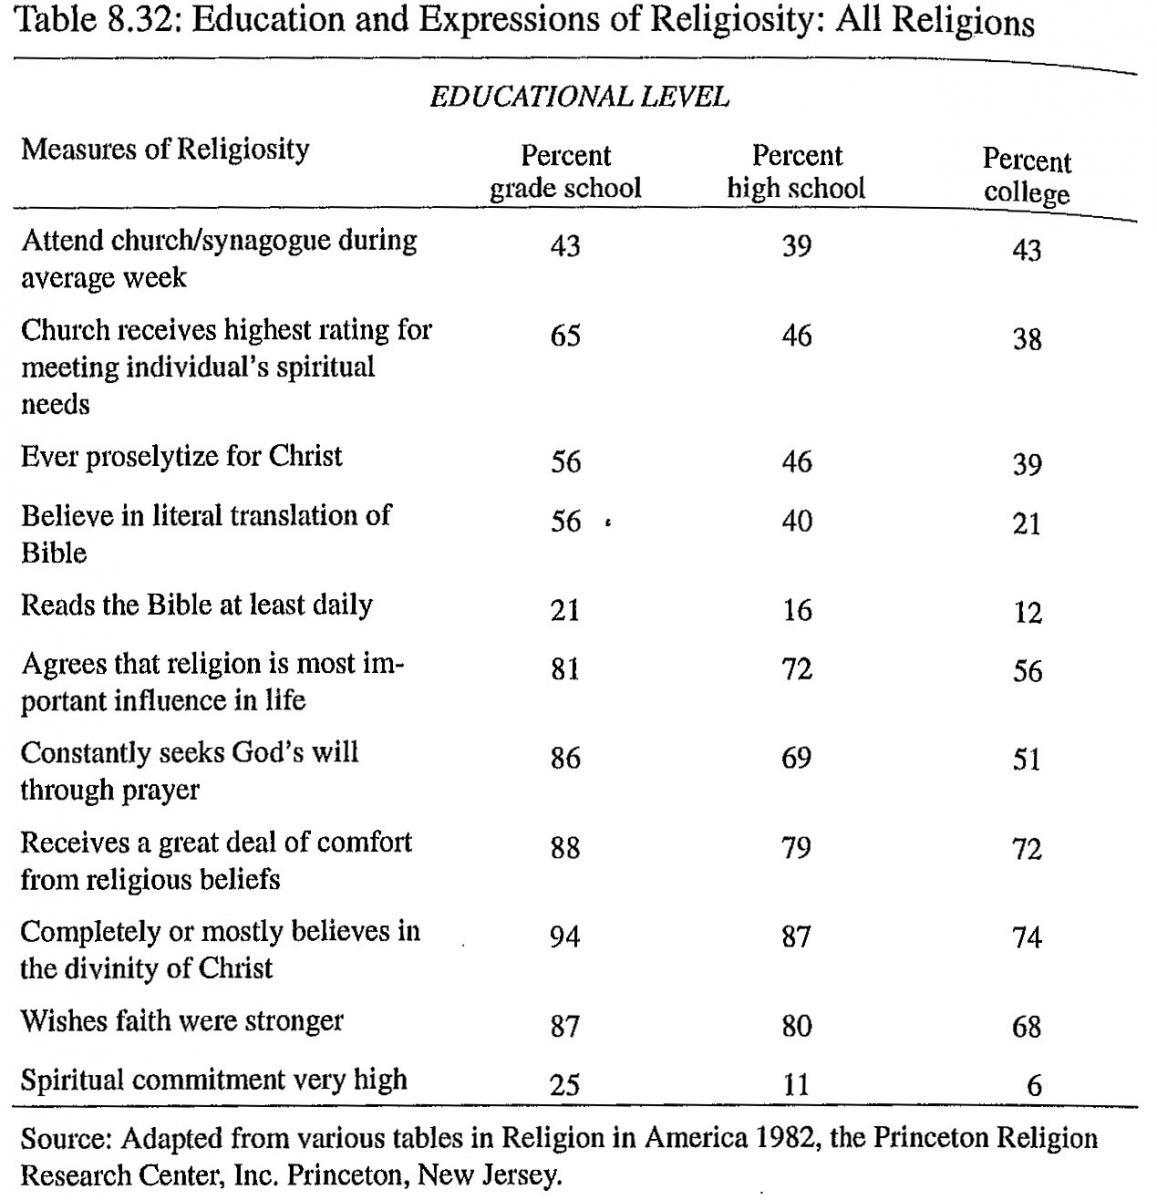 Education and Expressions of Religiosity: All Religions